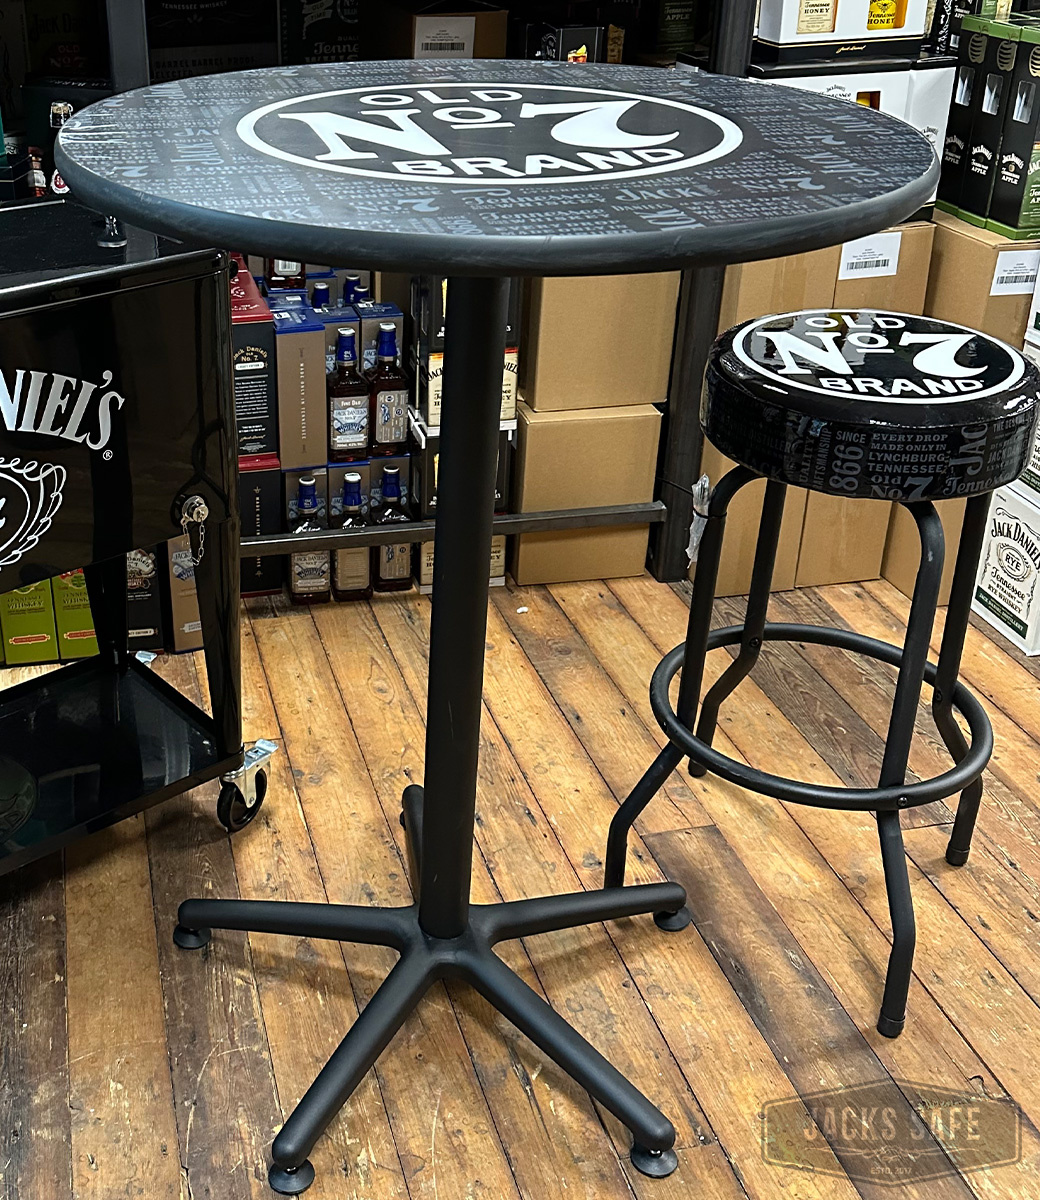 JACK DANIEL'S - PROMO ITEMS - CAFE TABLE "REPEAT" - OFFICIAL PRODUCT - QUALITY